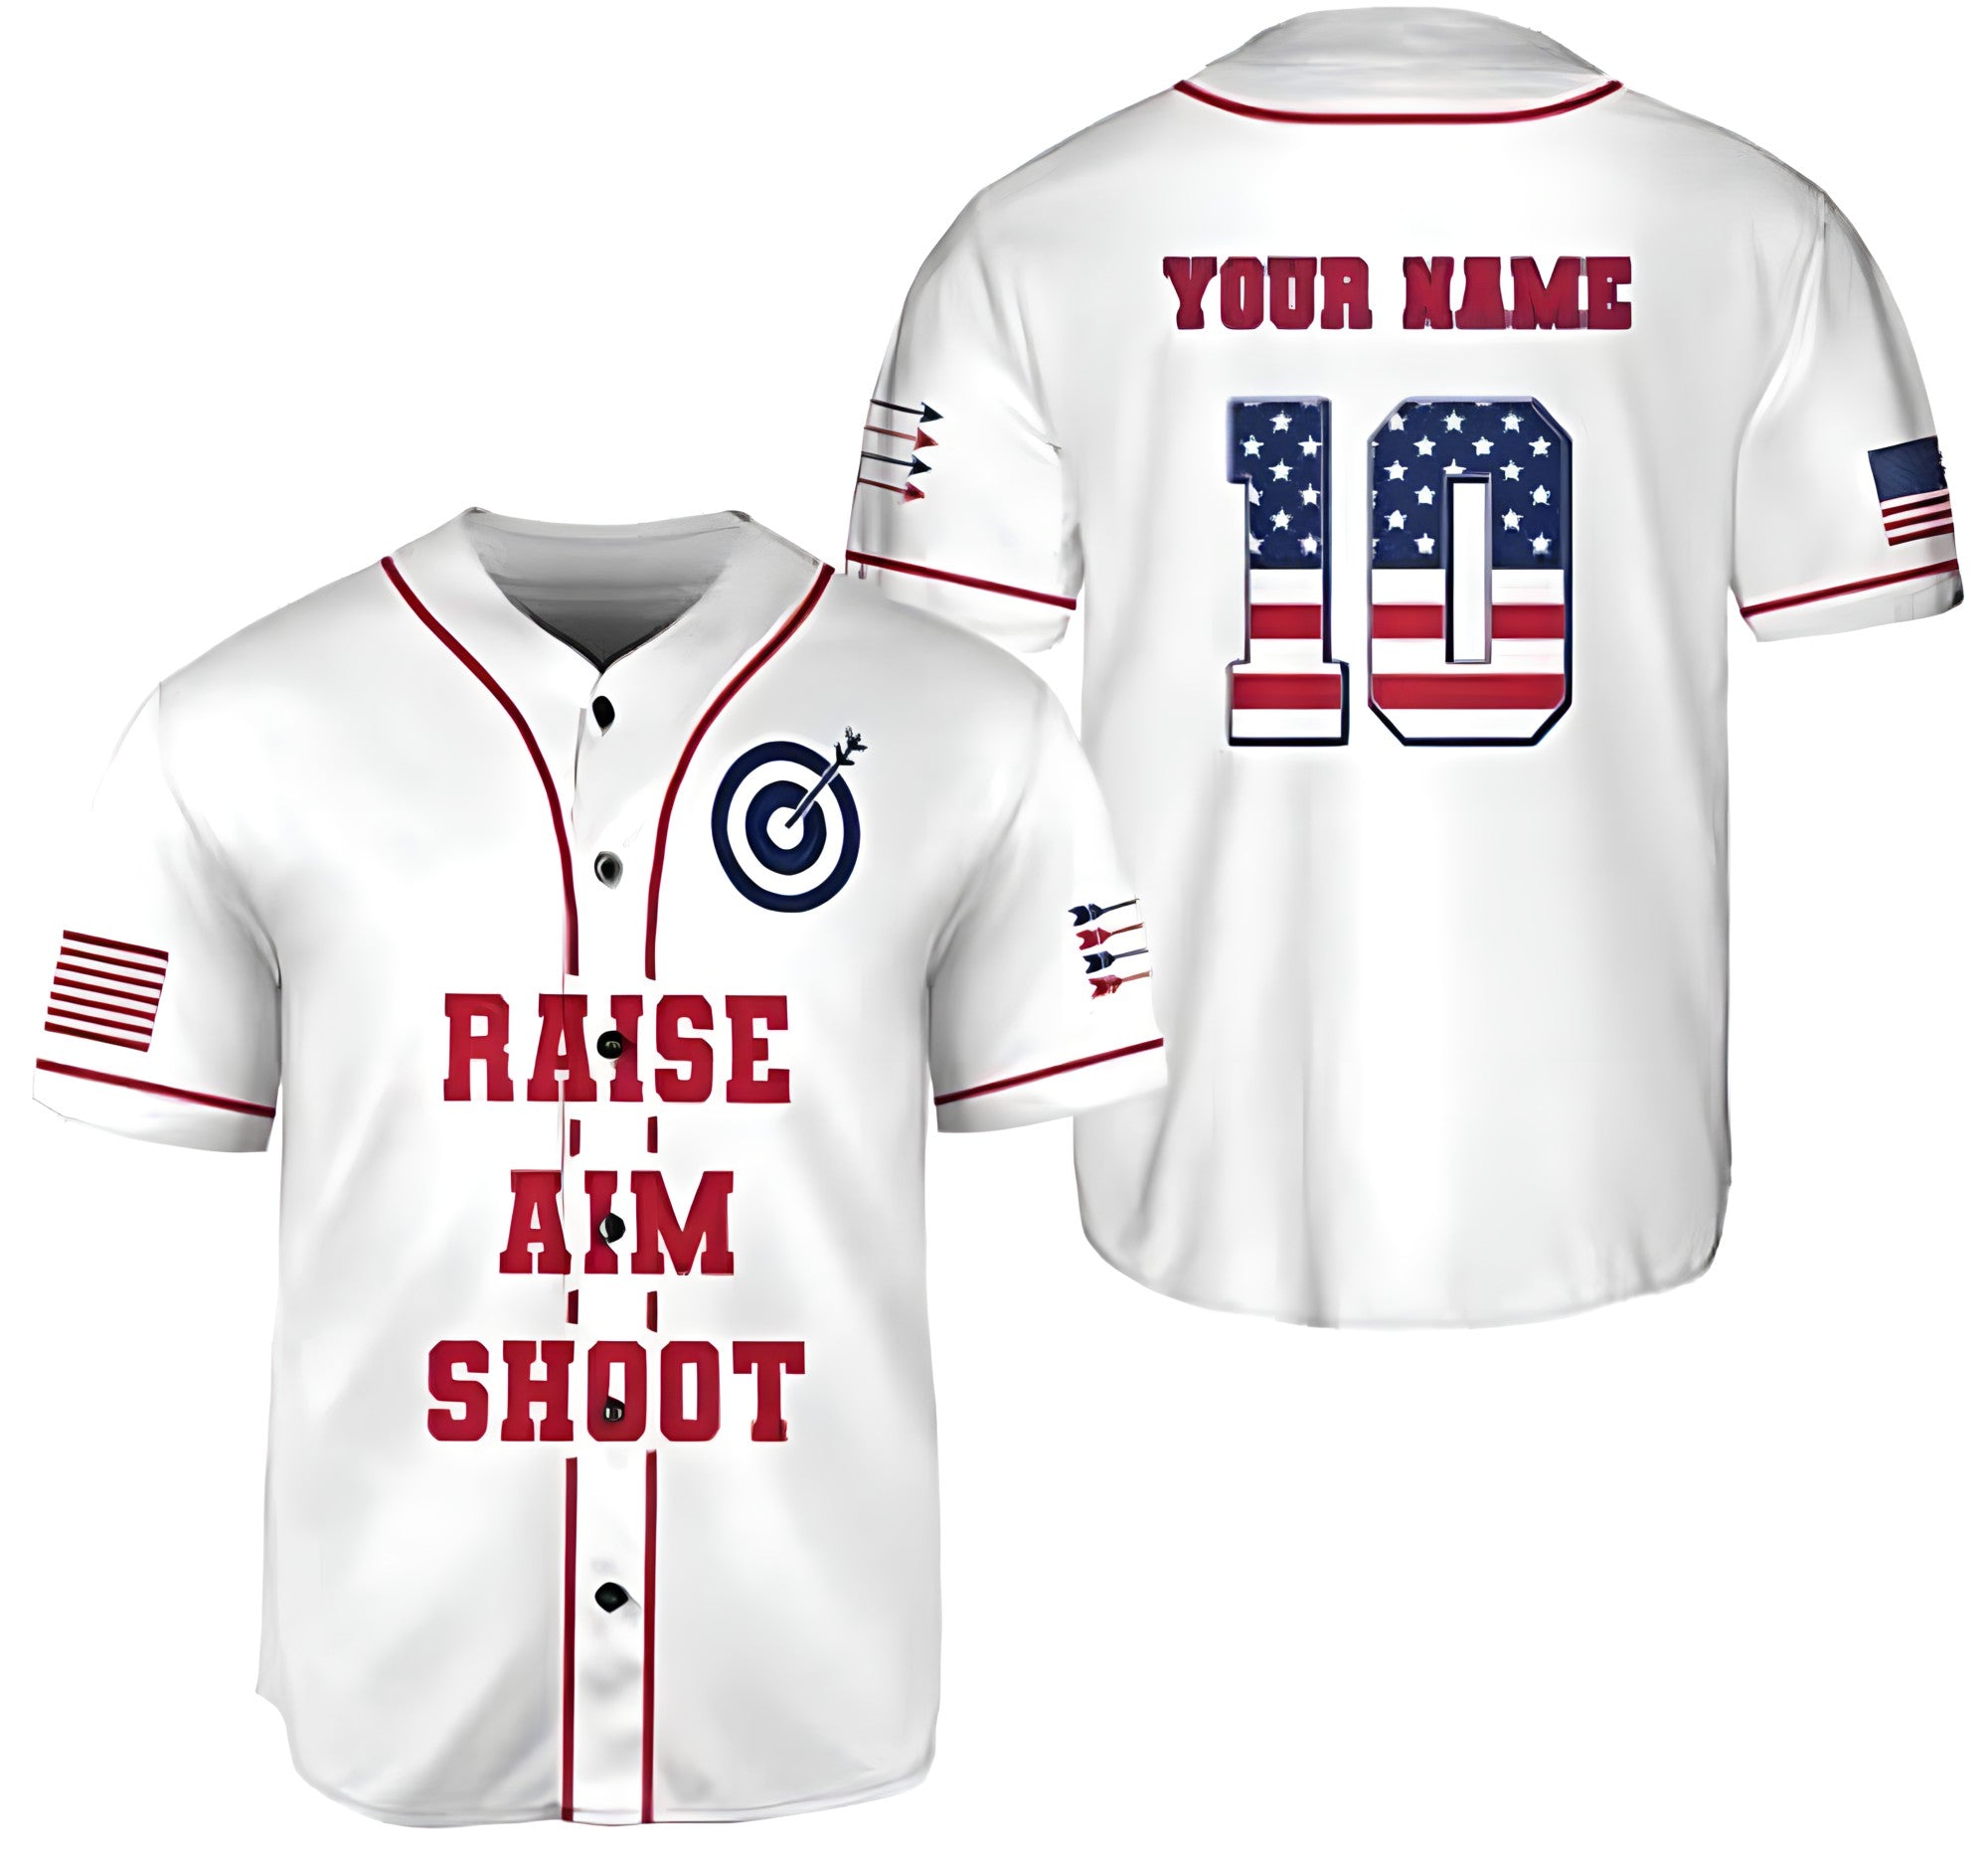 Personalized Name Number Dart Baseball Jersey/ Raise Aim Shoot Dart Baseball Jersey for Men Women